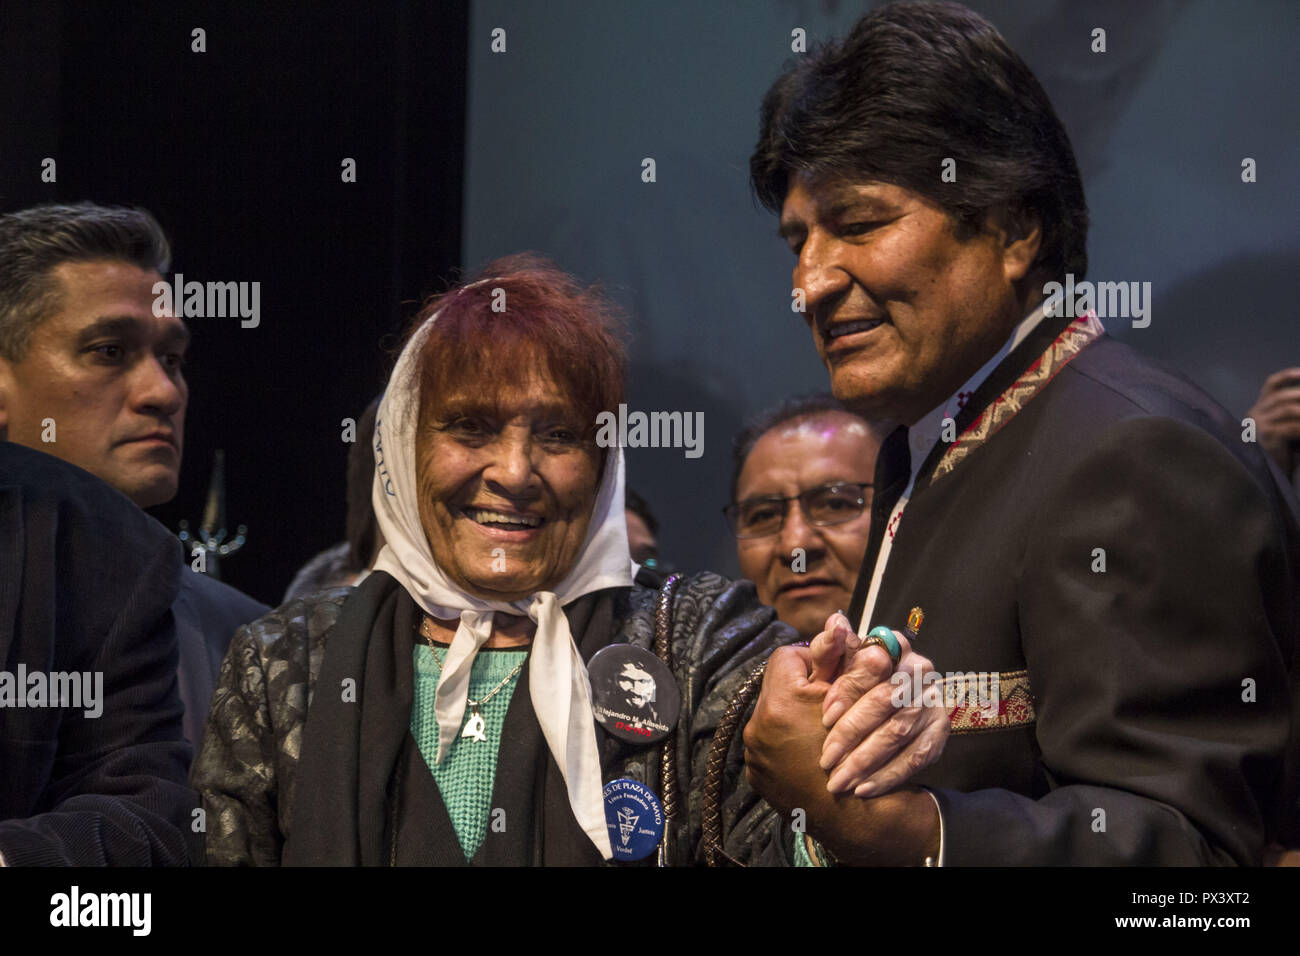 Buenos Aires, Federal Capital, Argentina. 19th Oct, 2018. Bolivian President Evo Morales with Taty Almeida, of Mothers of Plaza de Mayo, Founding Line, at the ceremony where the President of Bolivia was awarded the Doctorate Honoris Causa at the Metropolitan University for Education and Labor (UMET) in Buenos Aires Aires, Argentina. Credit: Roberto Almeida Aveledo/ZUMA Wire/Alamy Live News Stock Photo